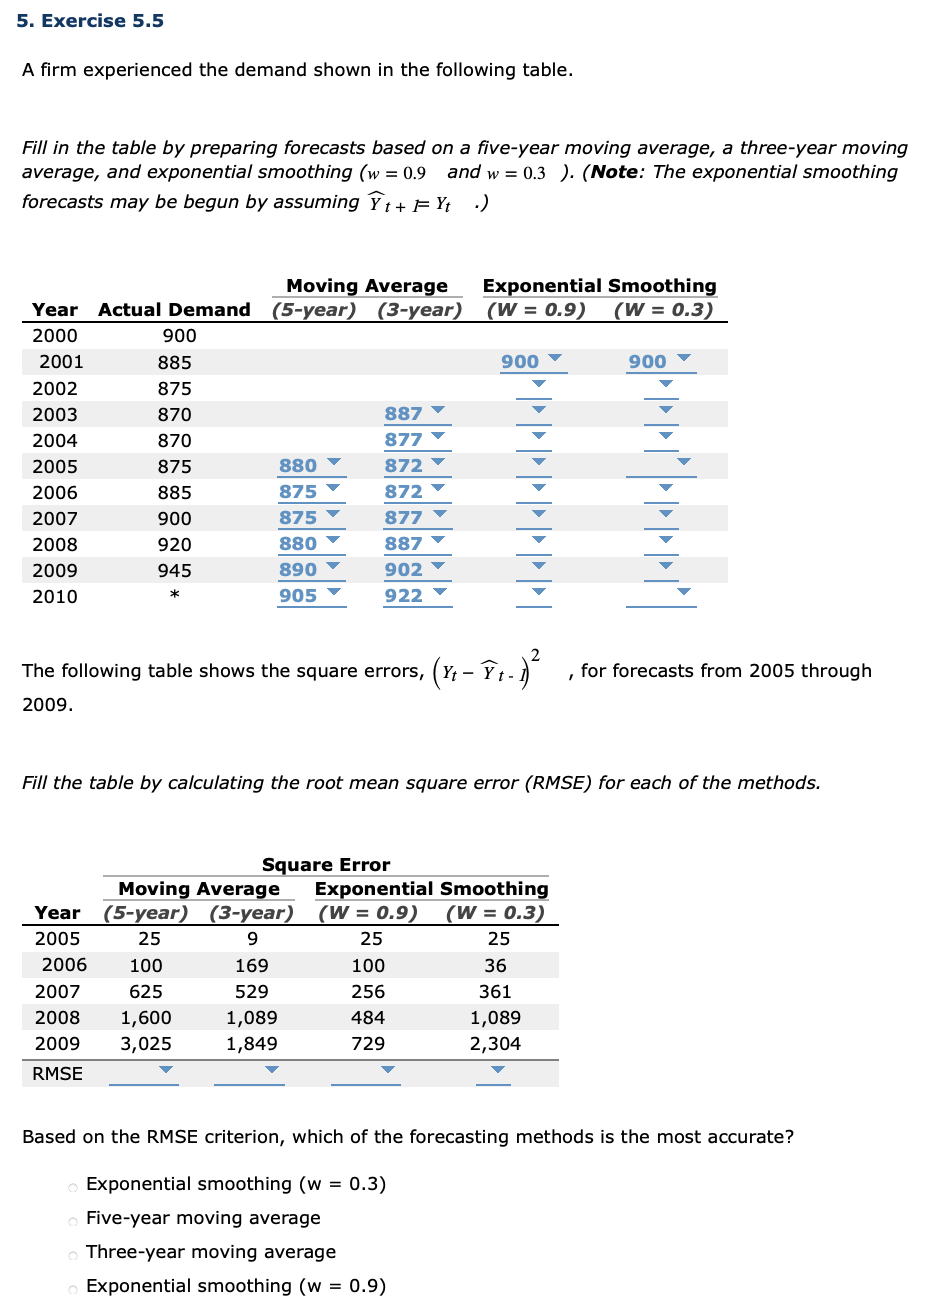 5. Exercise 5.5
A firm experienced the demand shown in the following table.
Fill in the table by preparing forecasts based on a five-year moving average, a three-year moving
average, and exponential smoothing (w = 0.9
forecasts may be begun by assuming Y t+ F Yt •)
and w = 0.3 ). (Note: The exponential smoothing
Moving Average
Actual Demand (5-year) (3-year)
Exponential Smoothing
(W = 0.9)
Year
(W = 0.3)
2000
900
2001
885
900
900
2002
875
2003
870
887 ▼
2004
870
877 ▼
2005
875
880
872 Y
2006
885
875
872
2007
900
875
877
2008
920
880
887 -
2009
945
890
902 Y
2010
905
922
The following table shows the square errors,
(Y; - T1-) , for forecasts from 2005 through
2009.
Fill the table by calculating the root mean square error (RMSE) for each of the methods.
Square Error
Exponential Smoothing
Moving Average
Year (5-year) (3-year) (W = 0.9)
(W = 0.3)
2005
25
9
25
25
2006
100
169
100
36
2007
625
529
256
361
2008
1,600
1,089
484
1,089
2009
3,025
1,849
729
2,304
RMSE
Based on the RMSE criterion, which of the forecasting methods is the most accurate?
Exponential smoothing (w = 0.3)
Five-year moving average
Three-year moving average
Exponential smoothing (w = 0.9)
